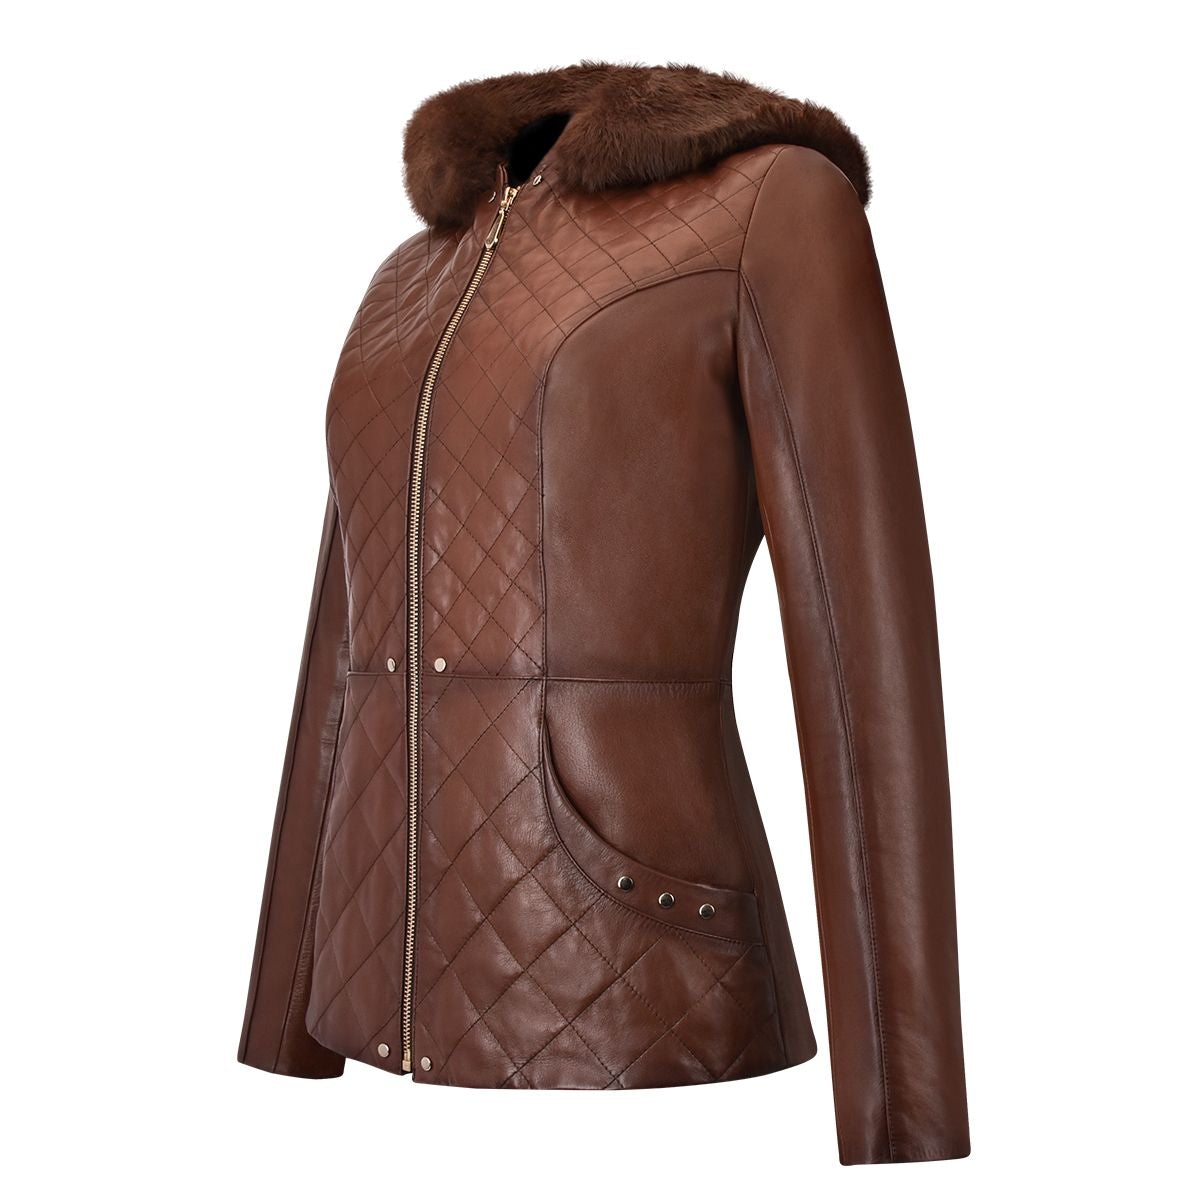 M259COC - Cuadra brown fashion sheepskin quilted parka jacket for women-Kuet.us